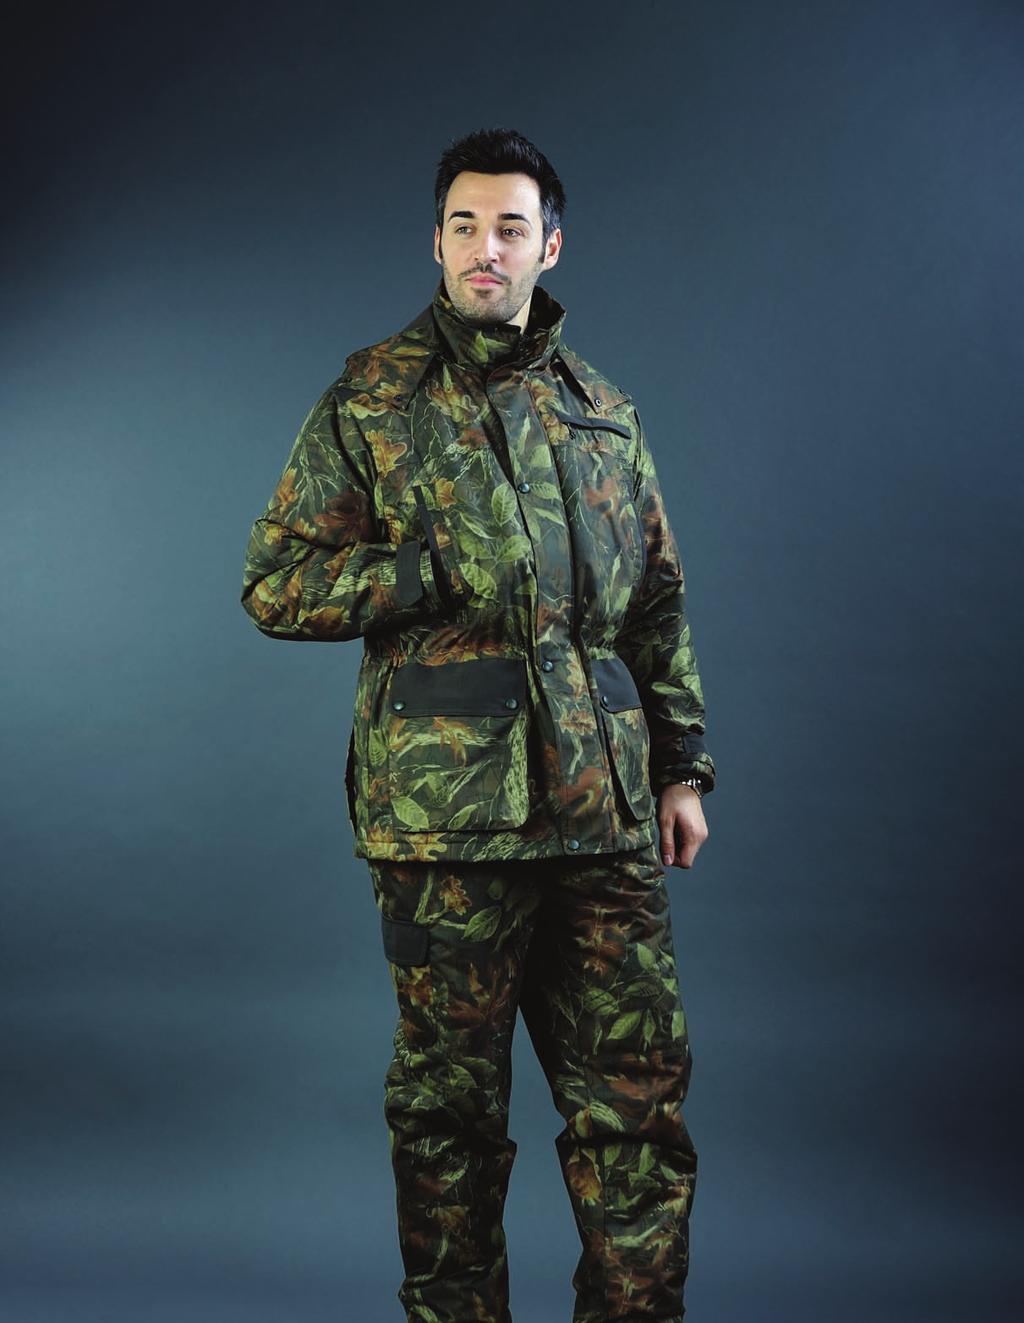 6 CAMOUFLAGE WINTER HUNTING SUIT JACKET CODE 10-1444 Hand warmer chest pockets Zippered chest pocket Functional pockets